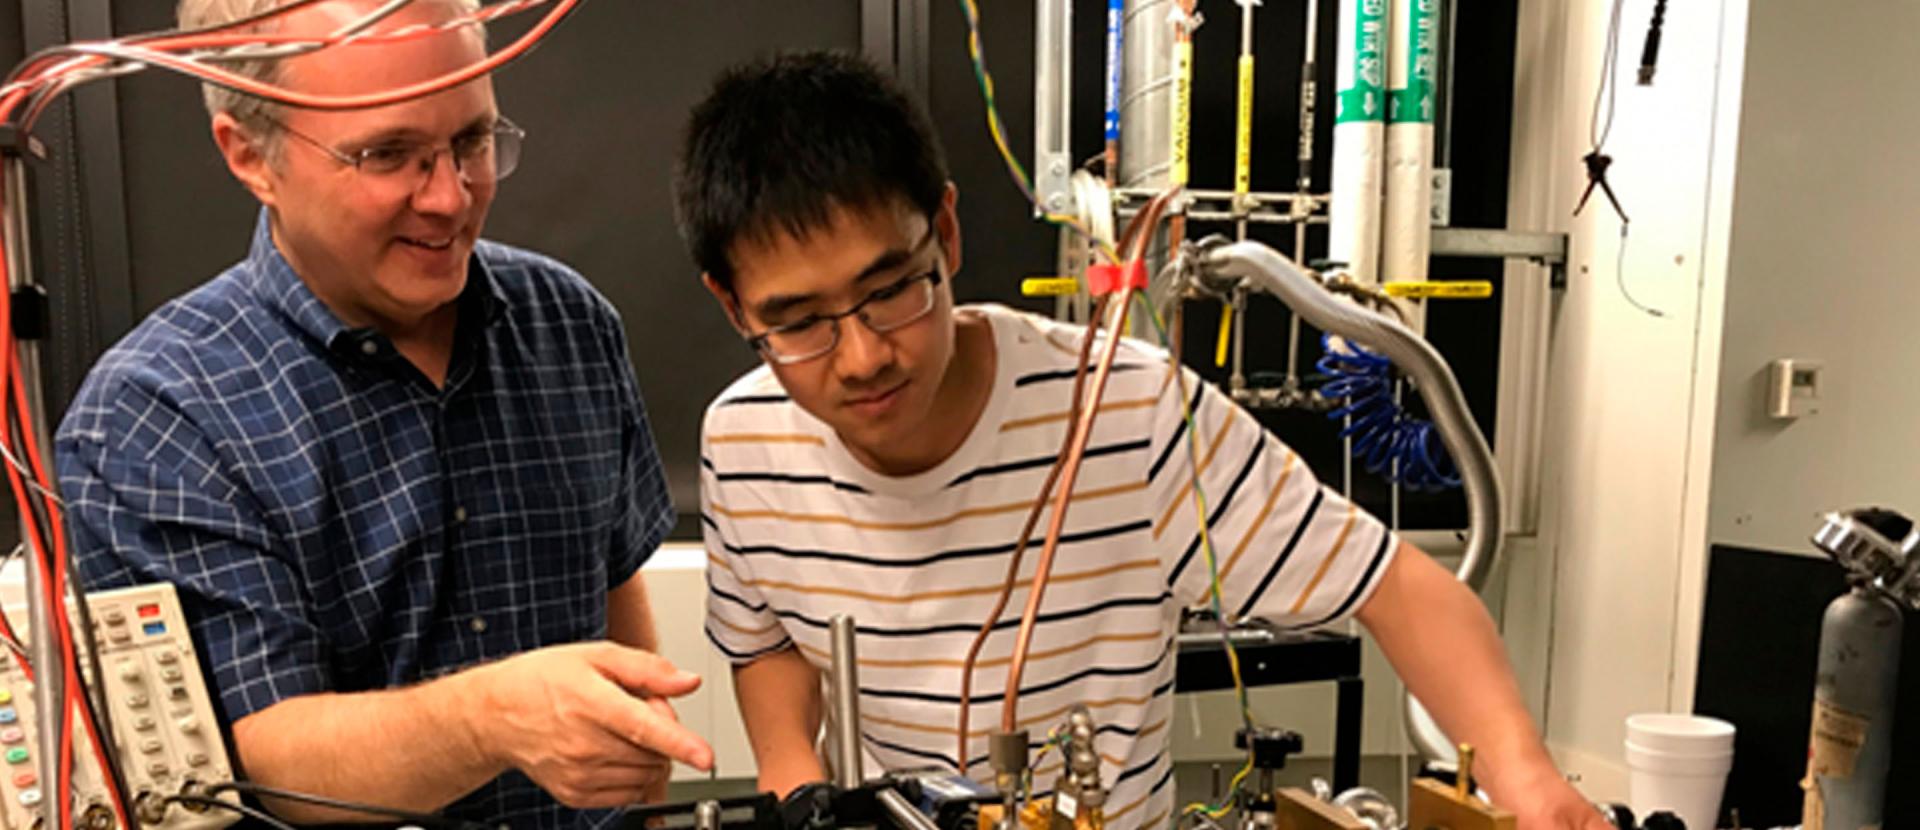 A Duke professor helping a Duke student with an electrical/engineering project.